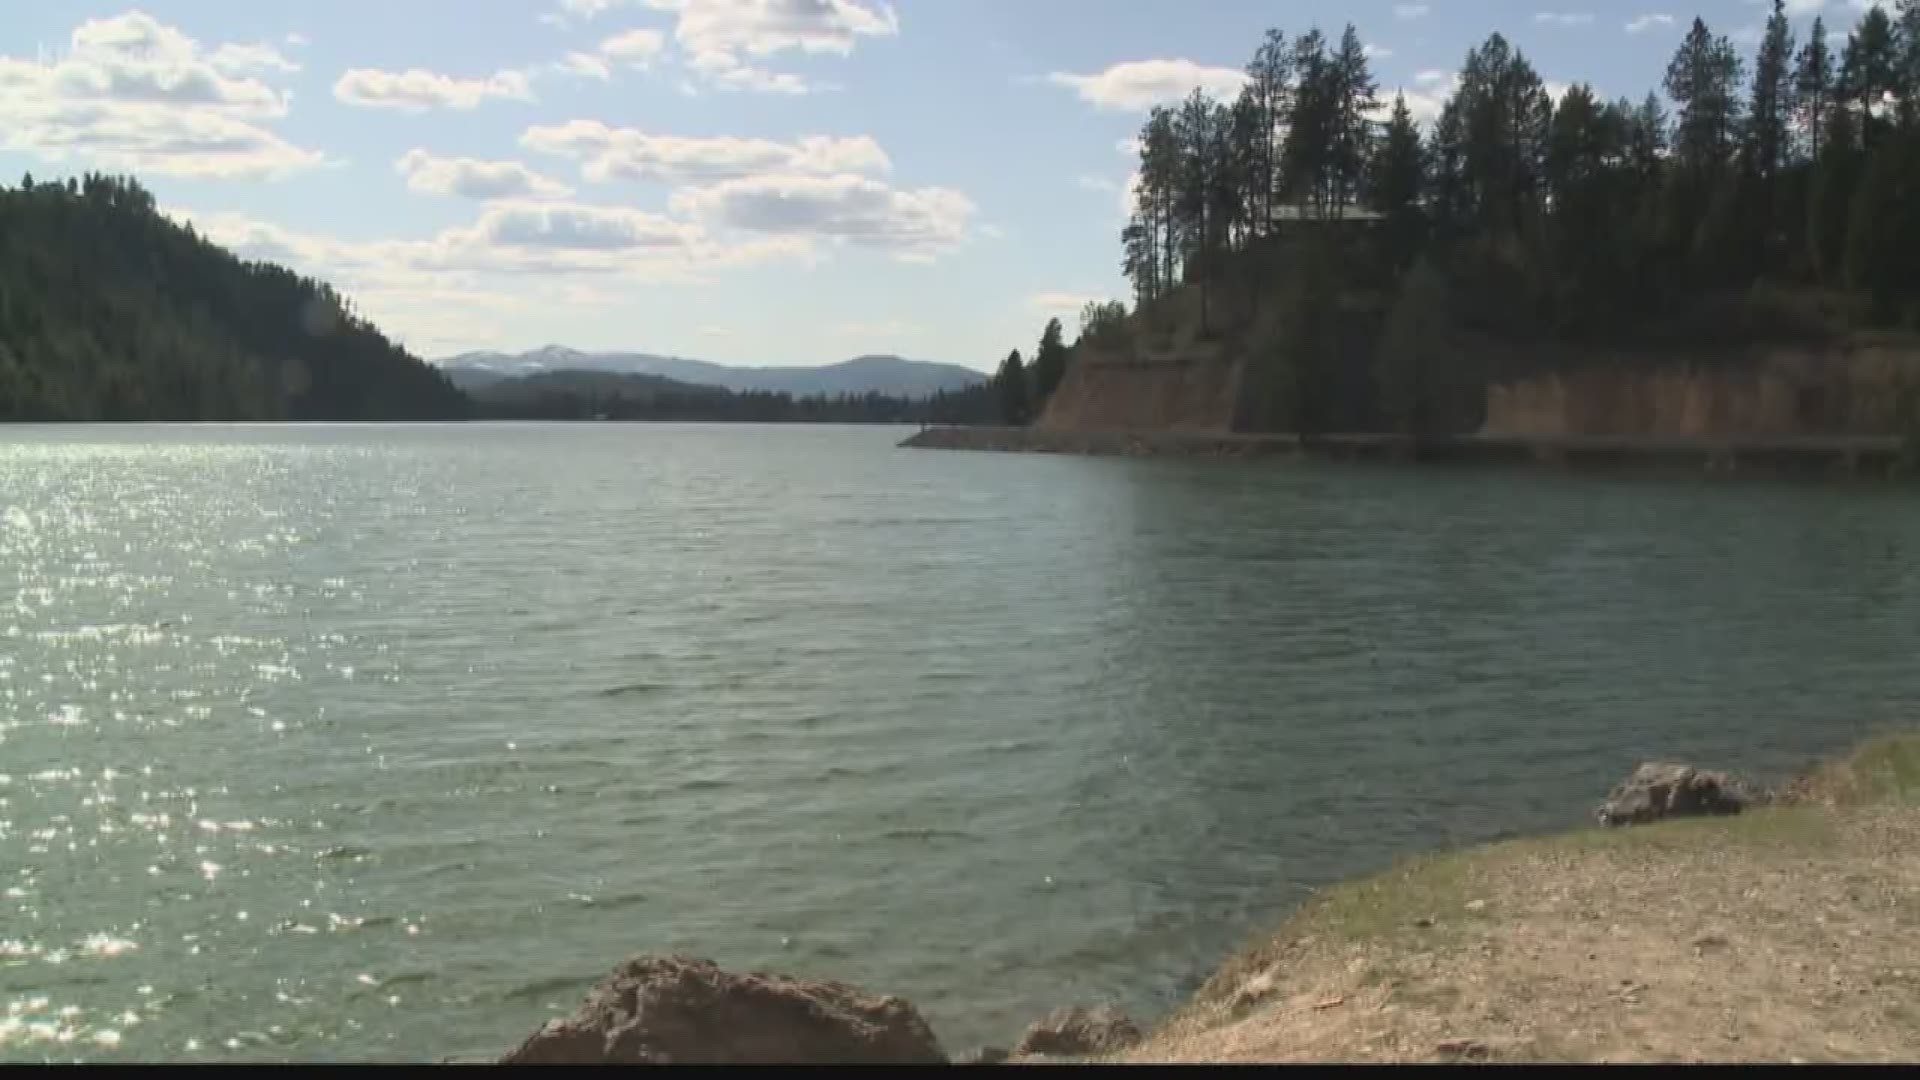 It was a unique crash - but one that first responders train for. Sunday, crews were called to Fernan Lake, just outside of Coeur d'Alene after a woman drove her car into the lake. (4-23-18)